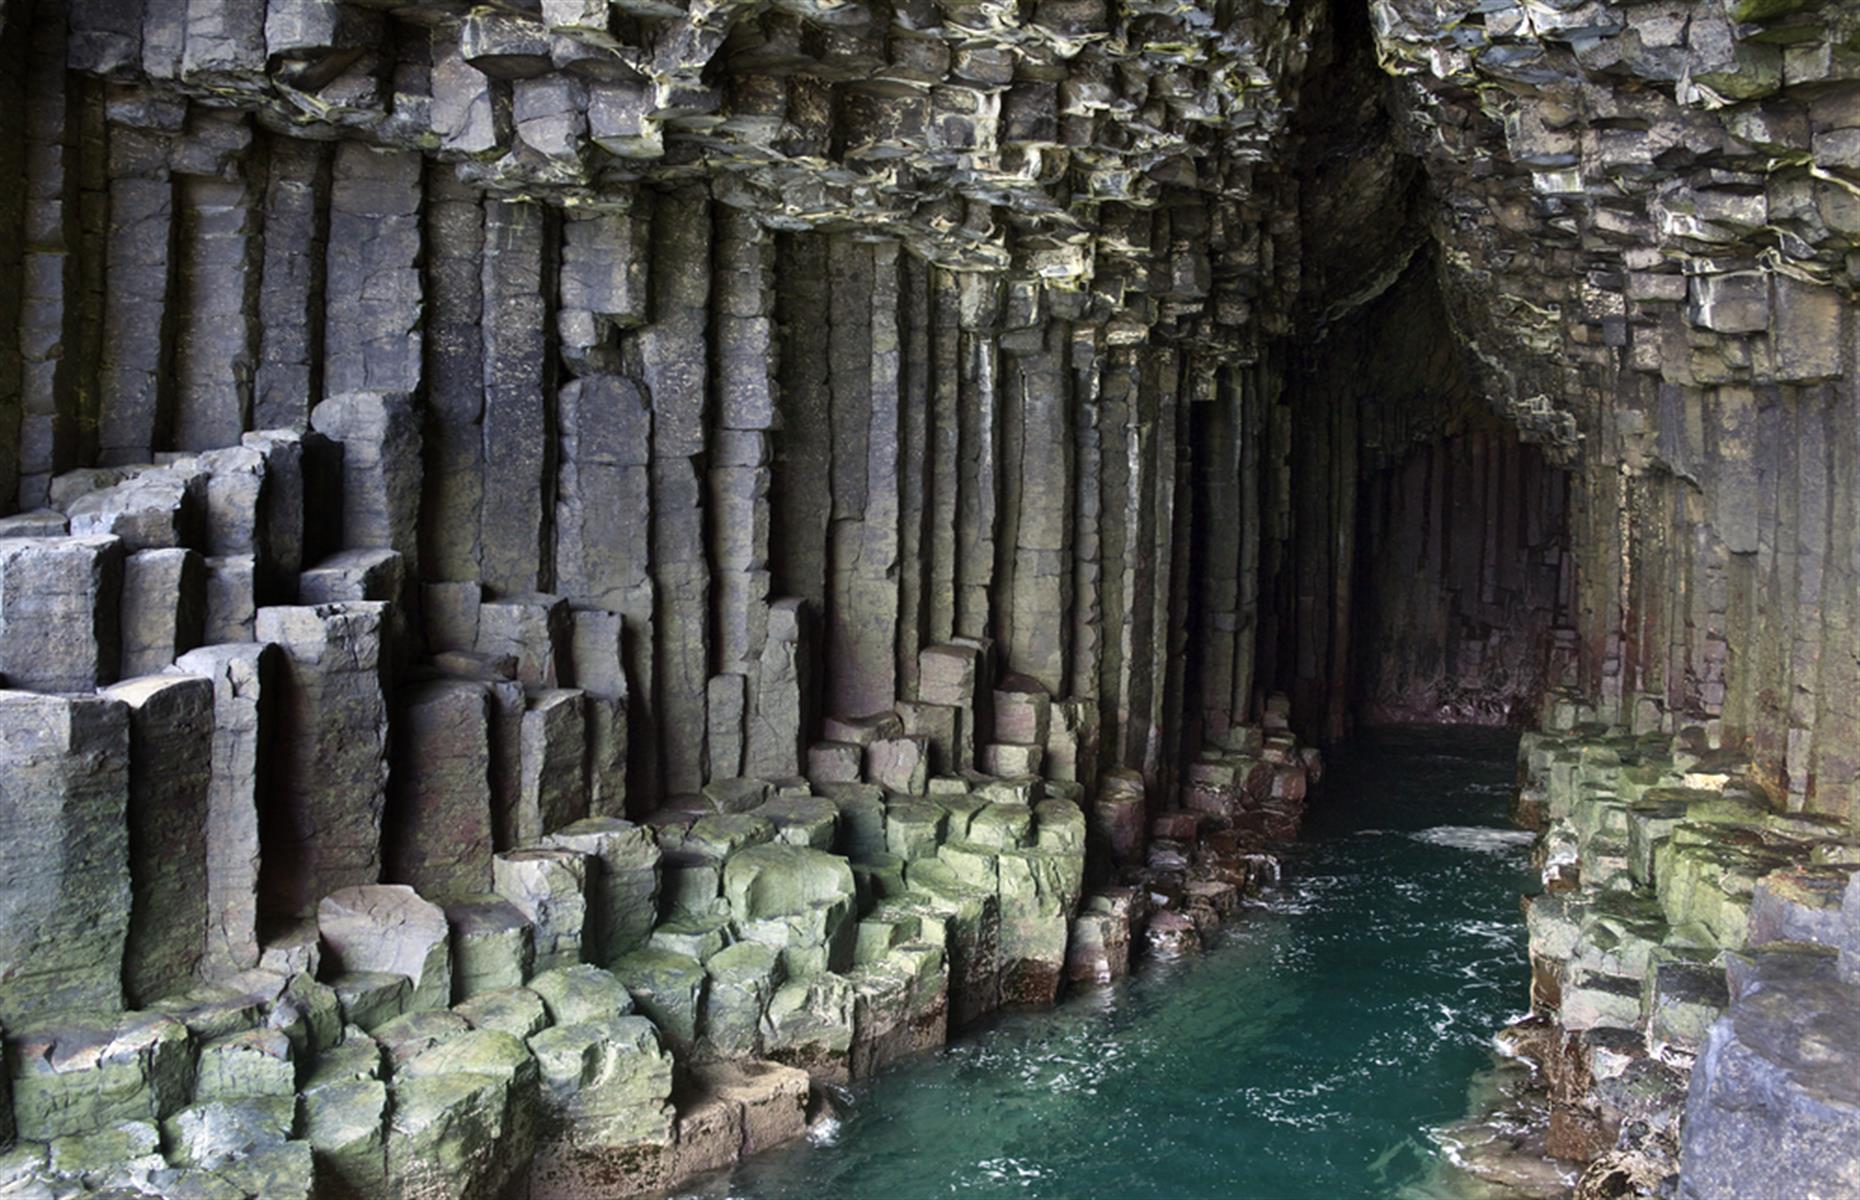 Fingal's Cave is a sea cave just off the coast of the Scottish island of Staffa. There's nowhere else in the world like it – Mendelssohn was moved to compose an overture inspired by it and Sir Walter Scott called it "extraordinary". The hexagonal formations are so regular that some people assume it was made by hand, but it's actually all natural. In good weather, tours run regularly from Oban, Iona and the Isle of Mull.